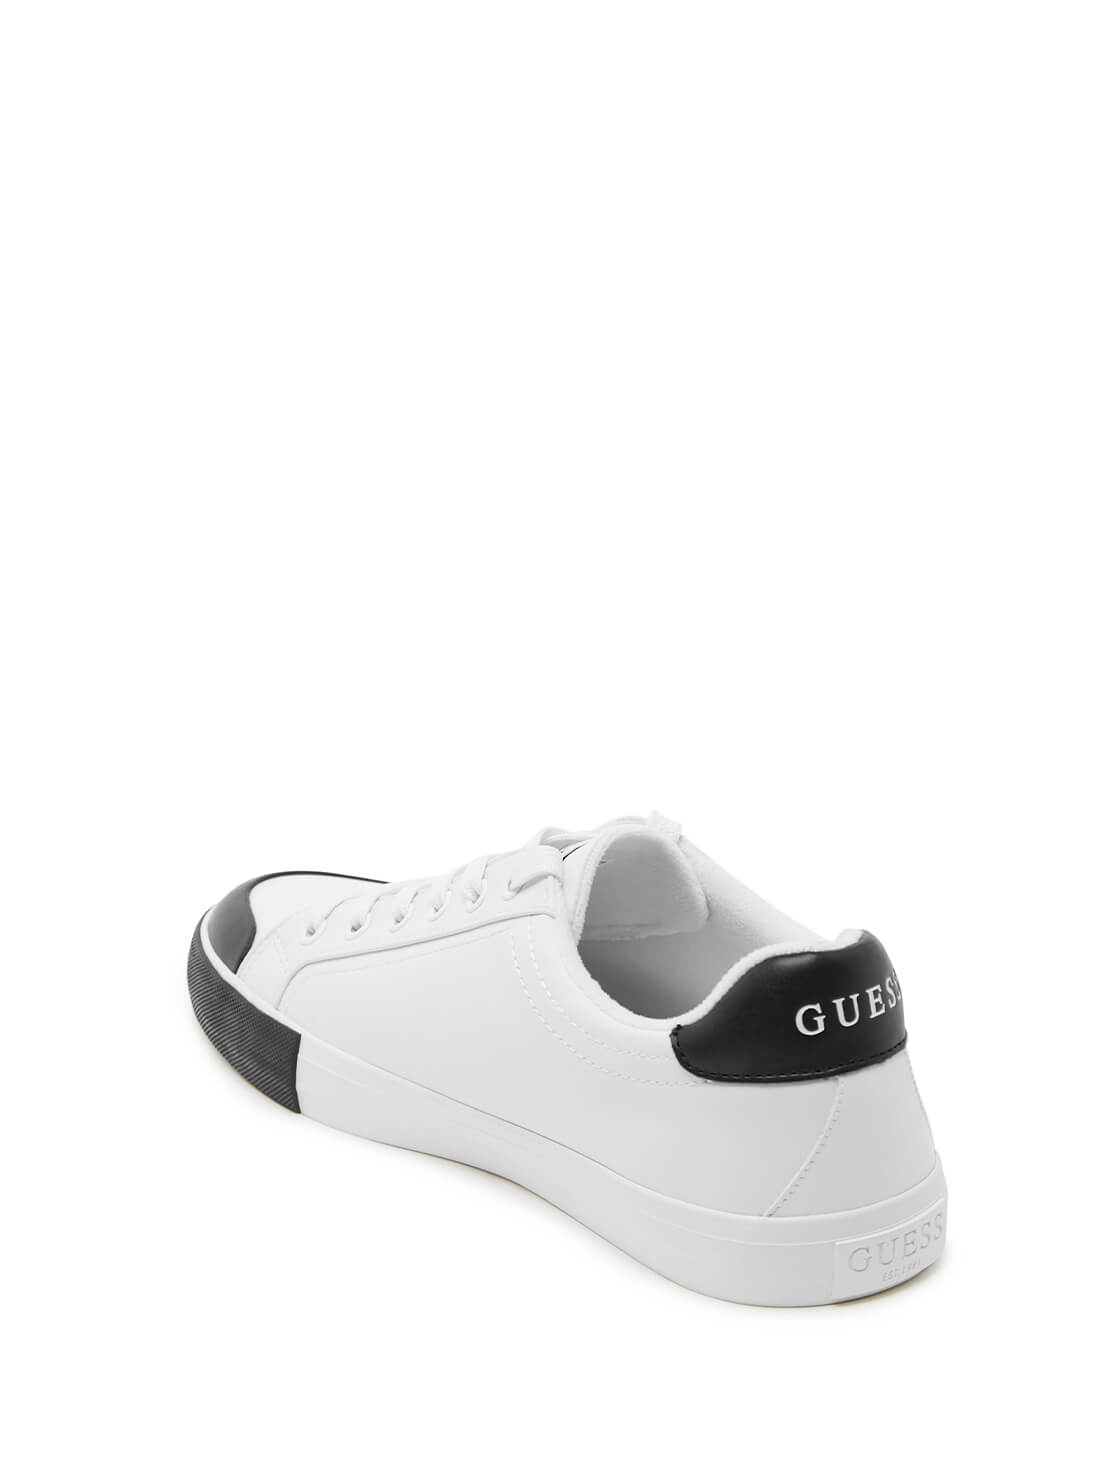 GUESS Mens White Low-Top Paxi Sneakers PAXI-A Back View